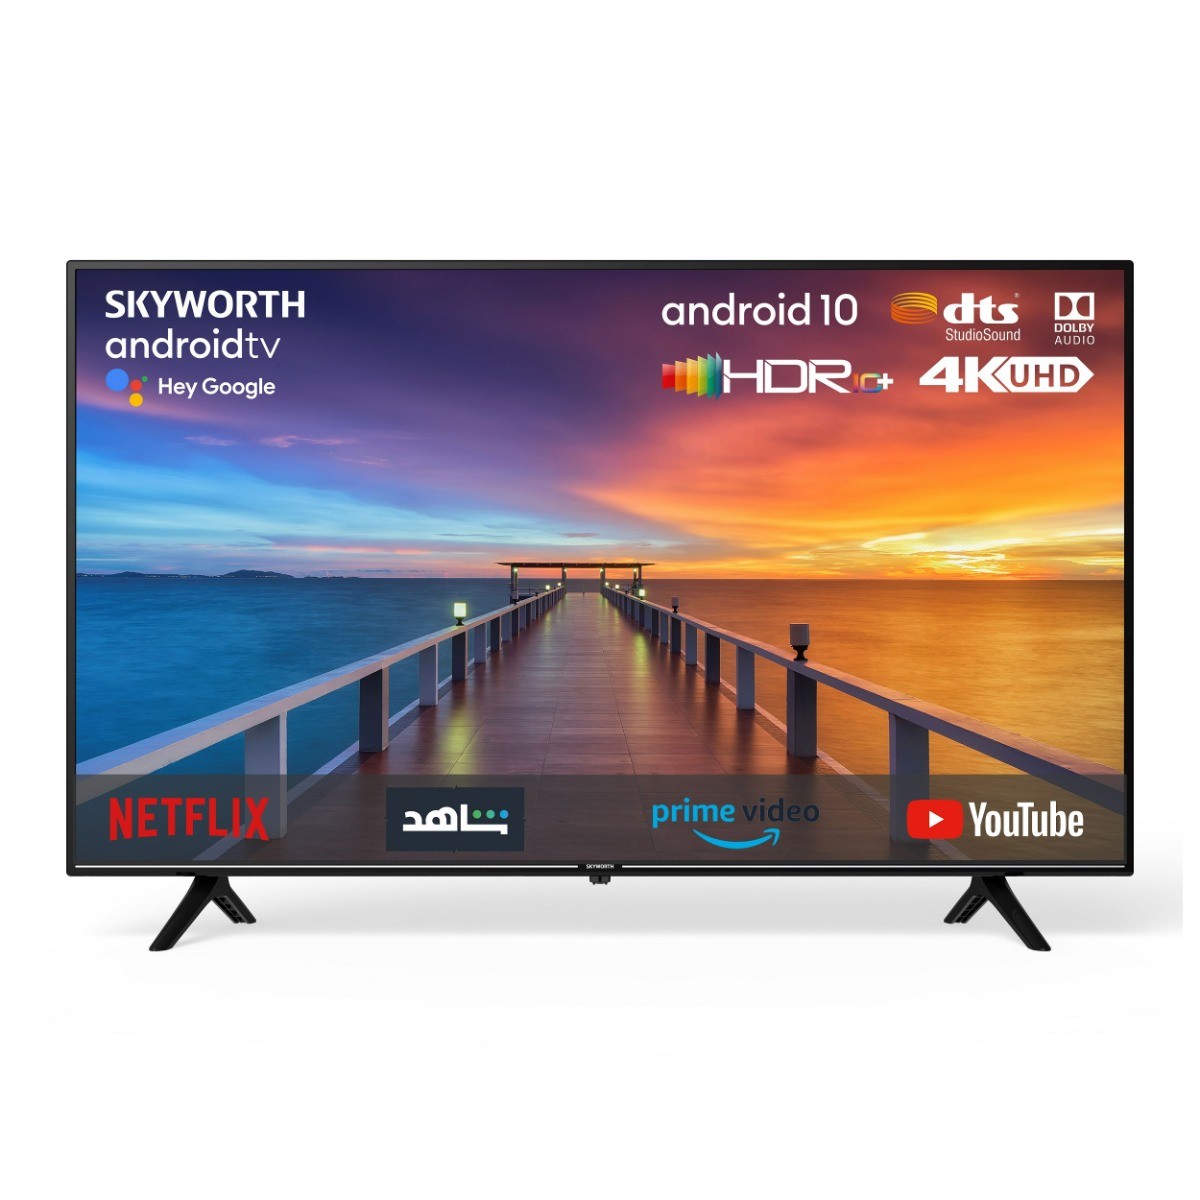 Skyworth 50inch UHD 4K, HDR 10, SMART, Android 10, LED TV- 50SUC8300